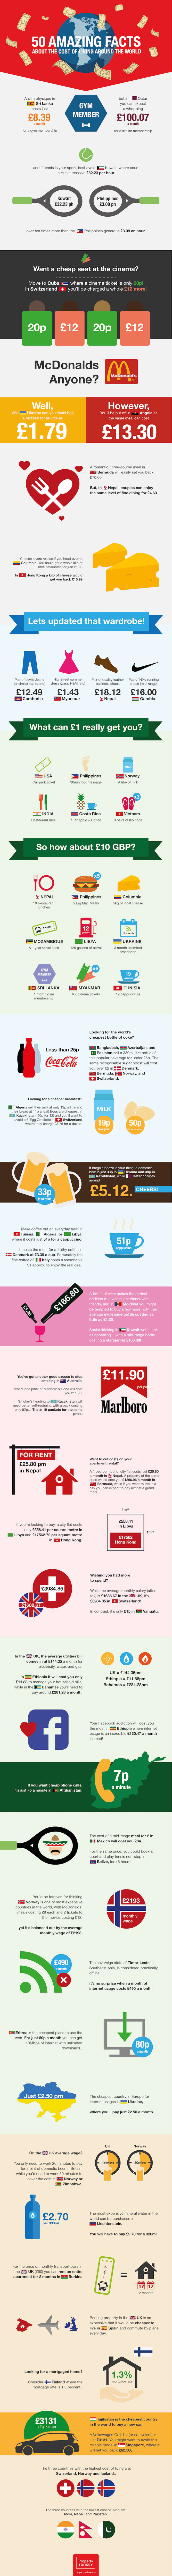 Facts about living abroad